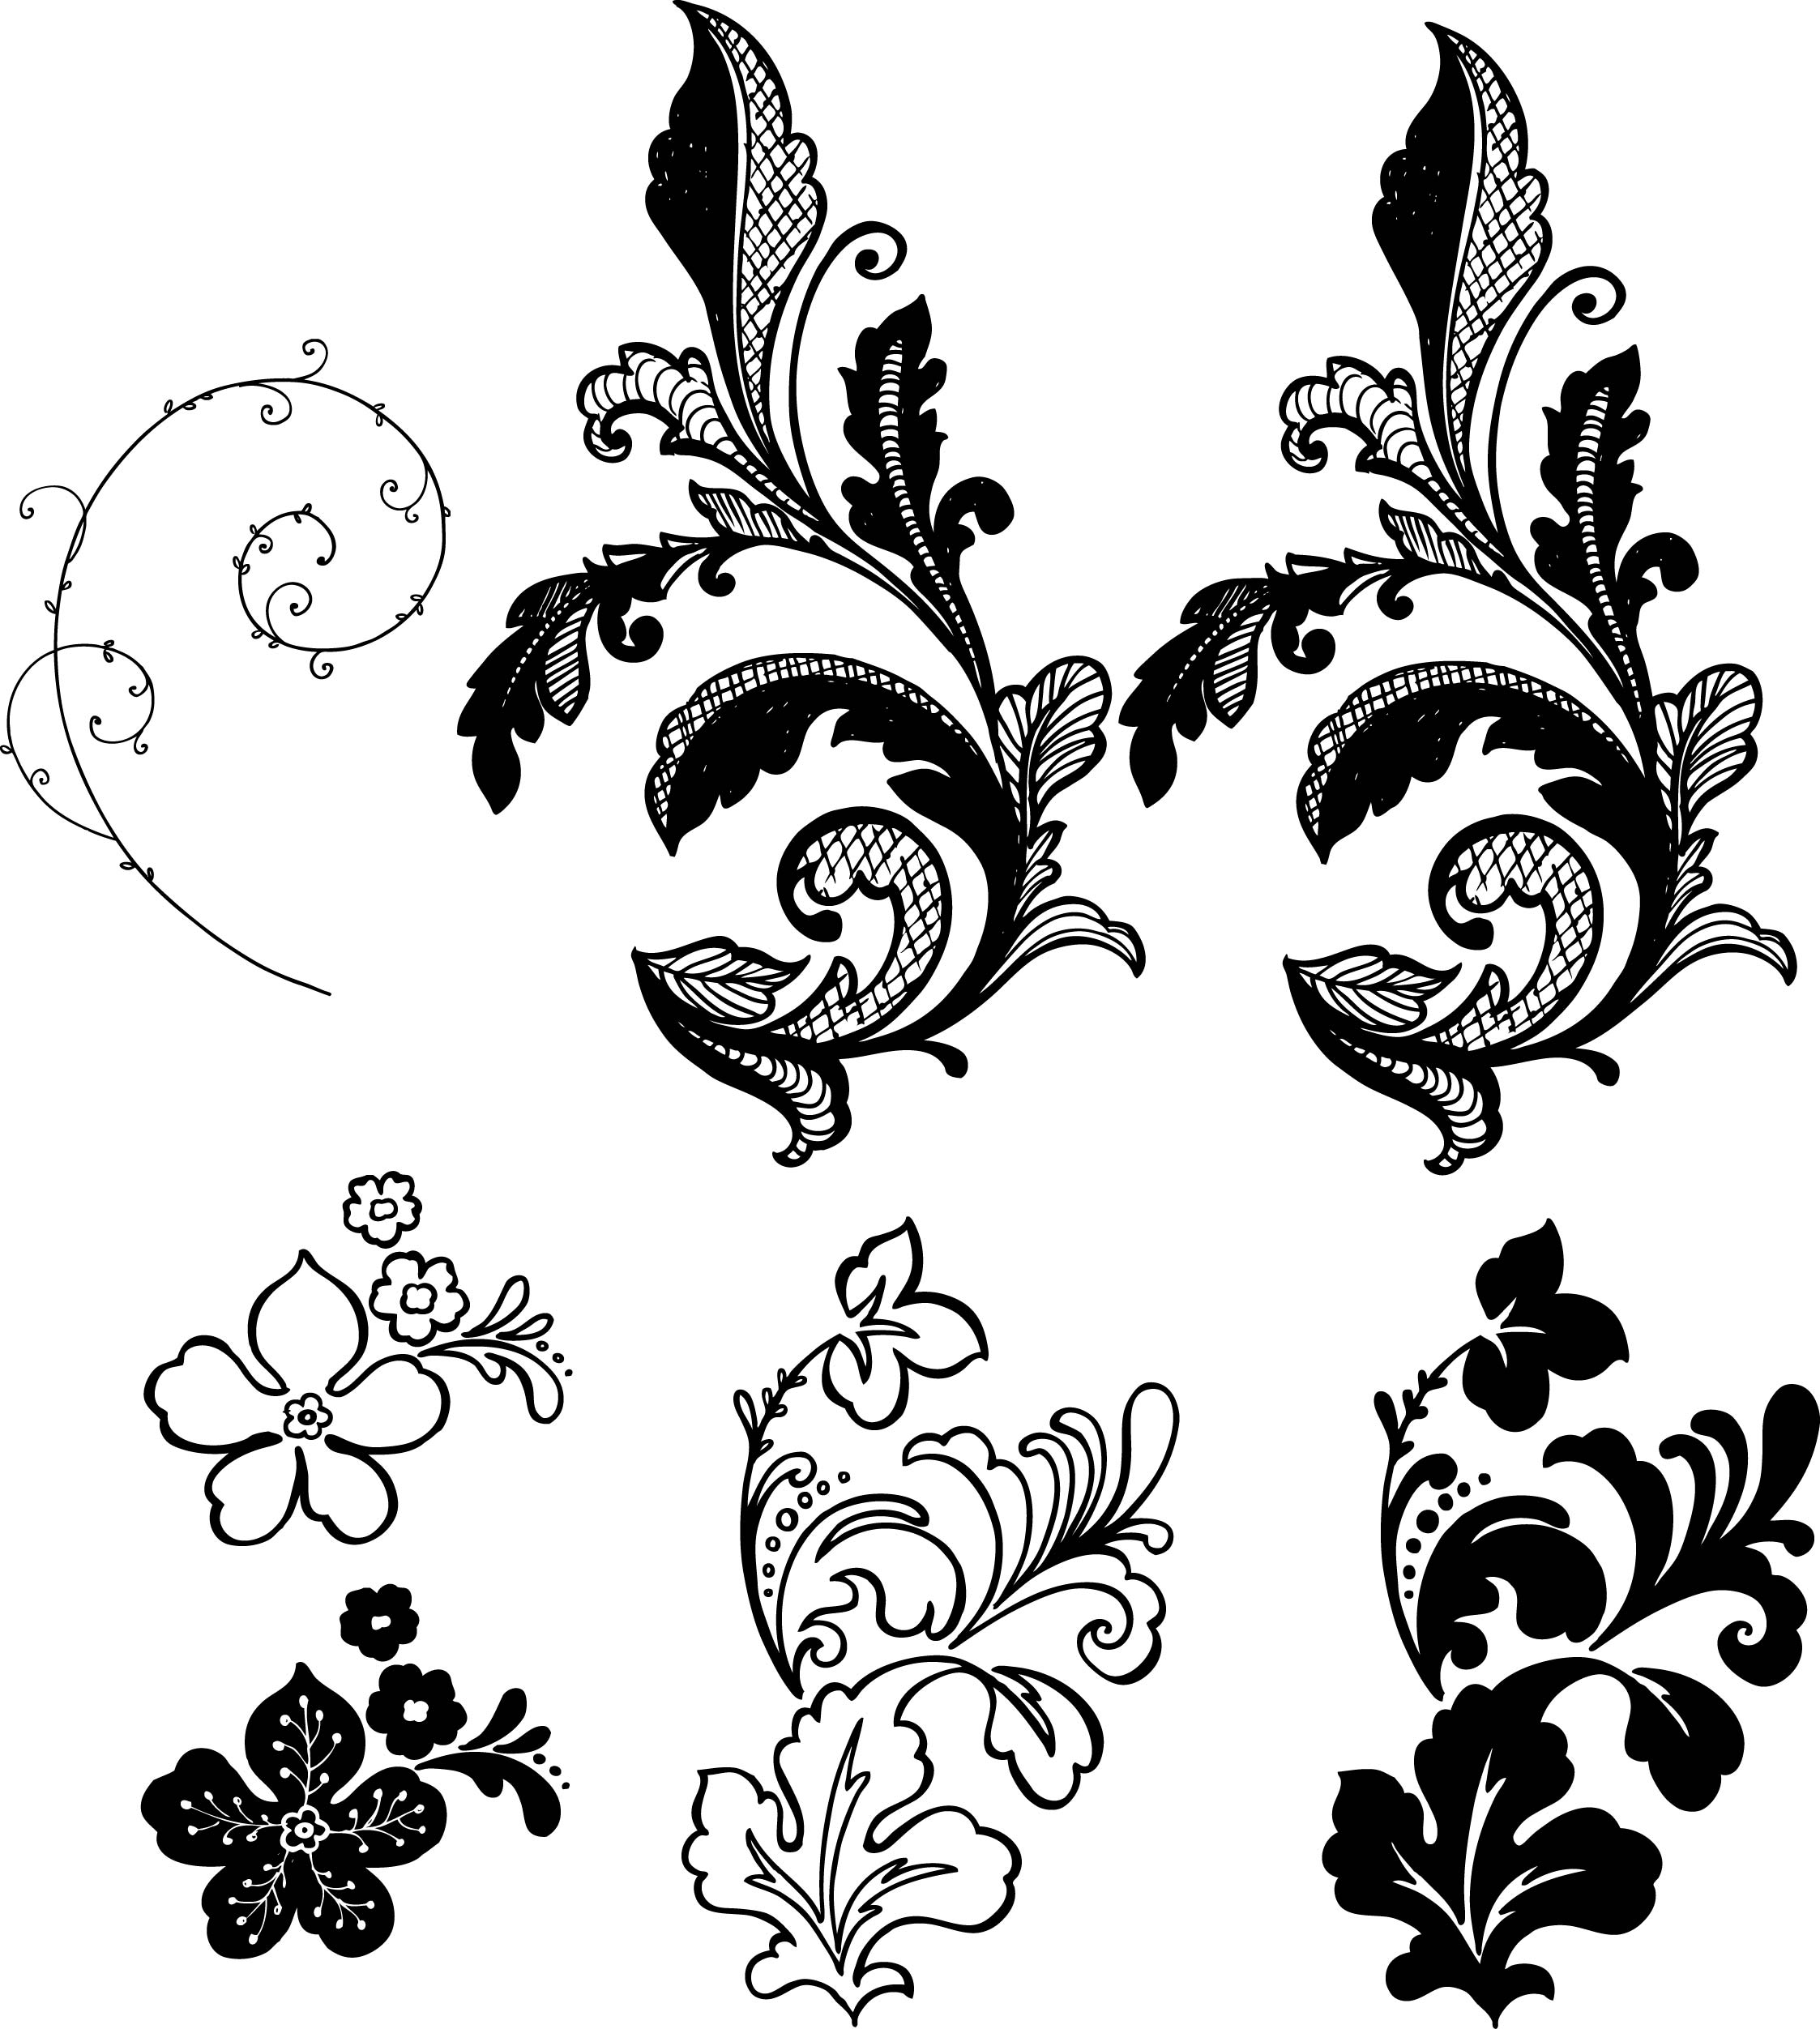 Flower background pattern vector side Free Vector / 4Vector